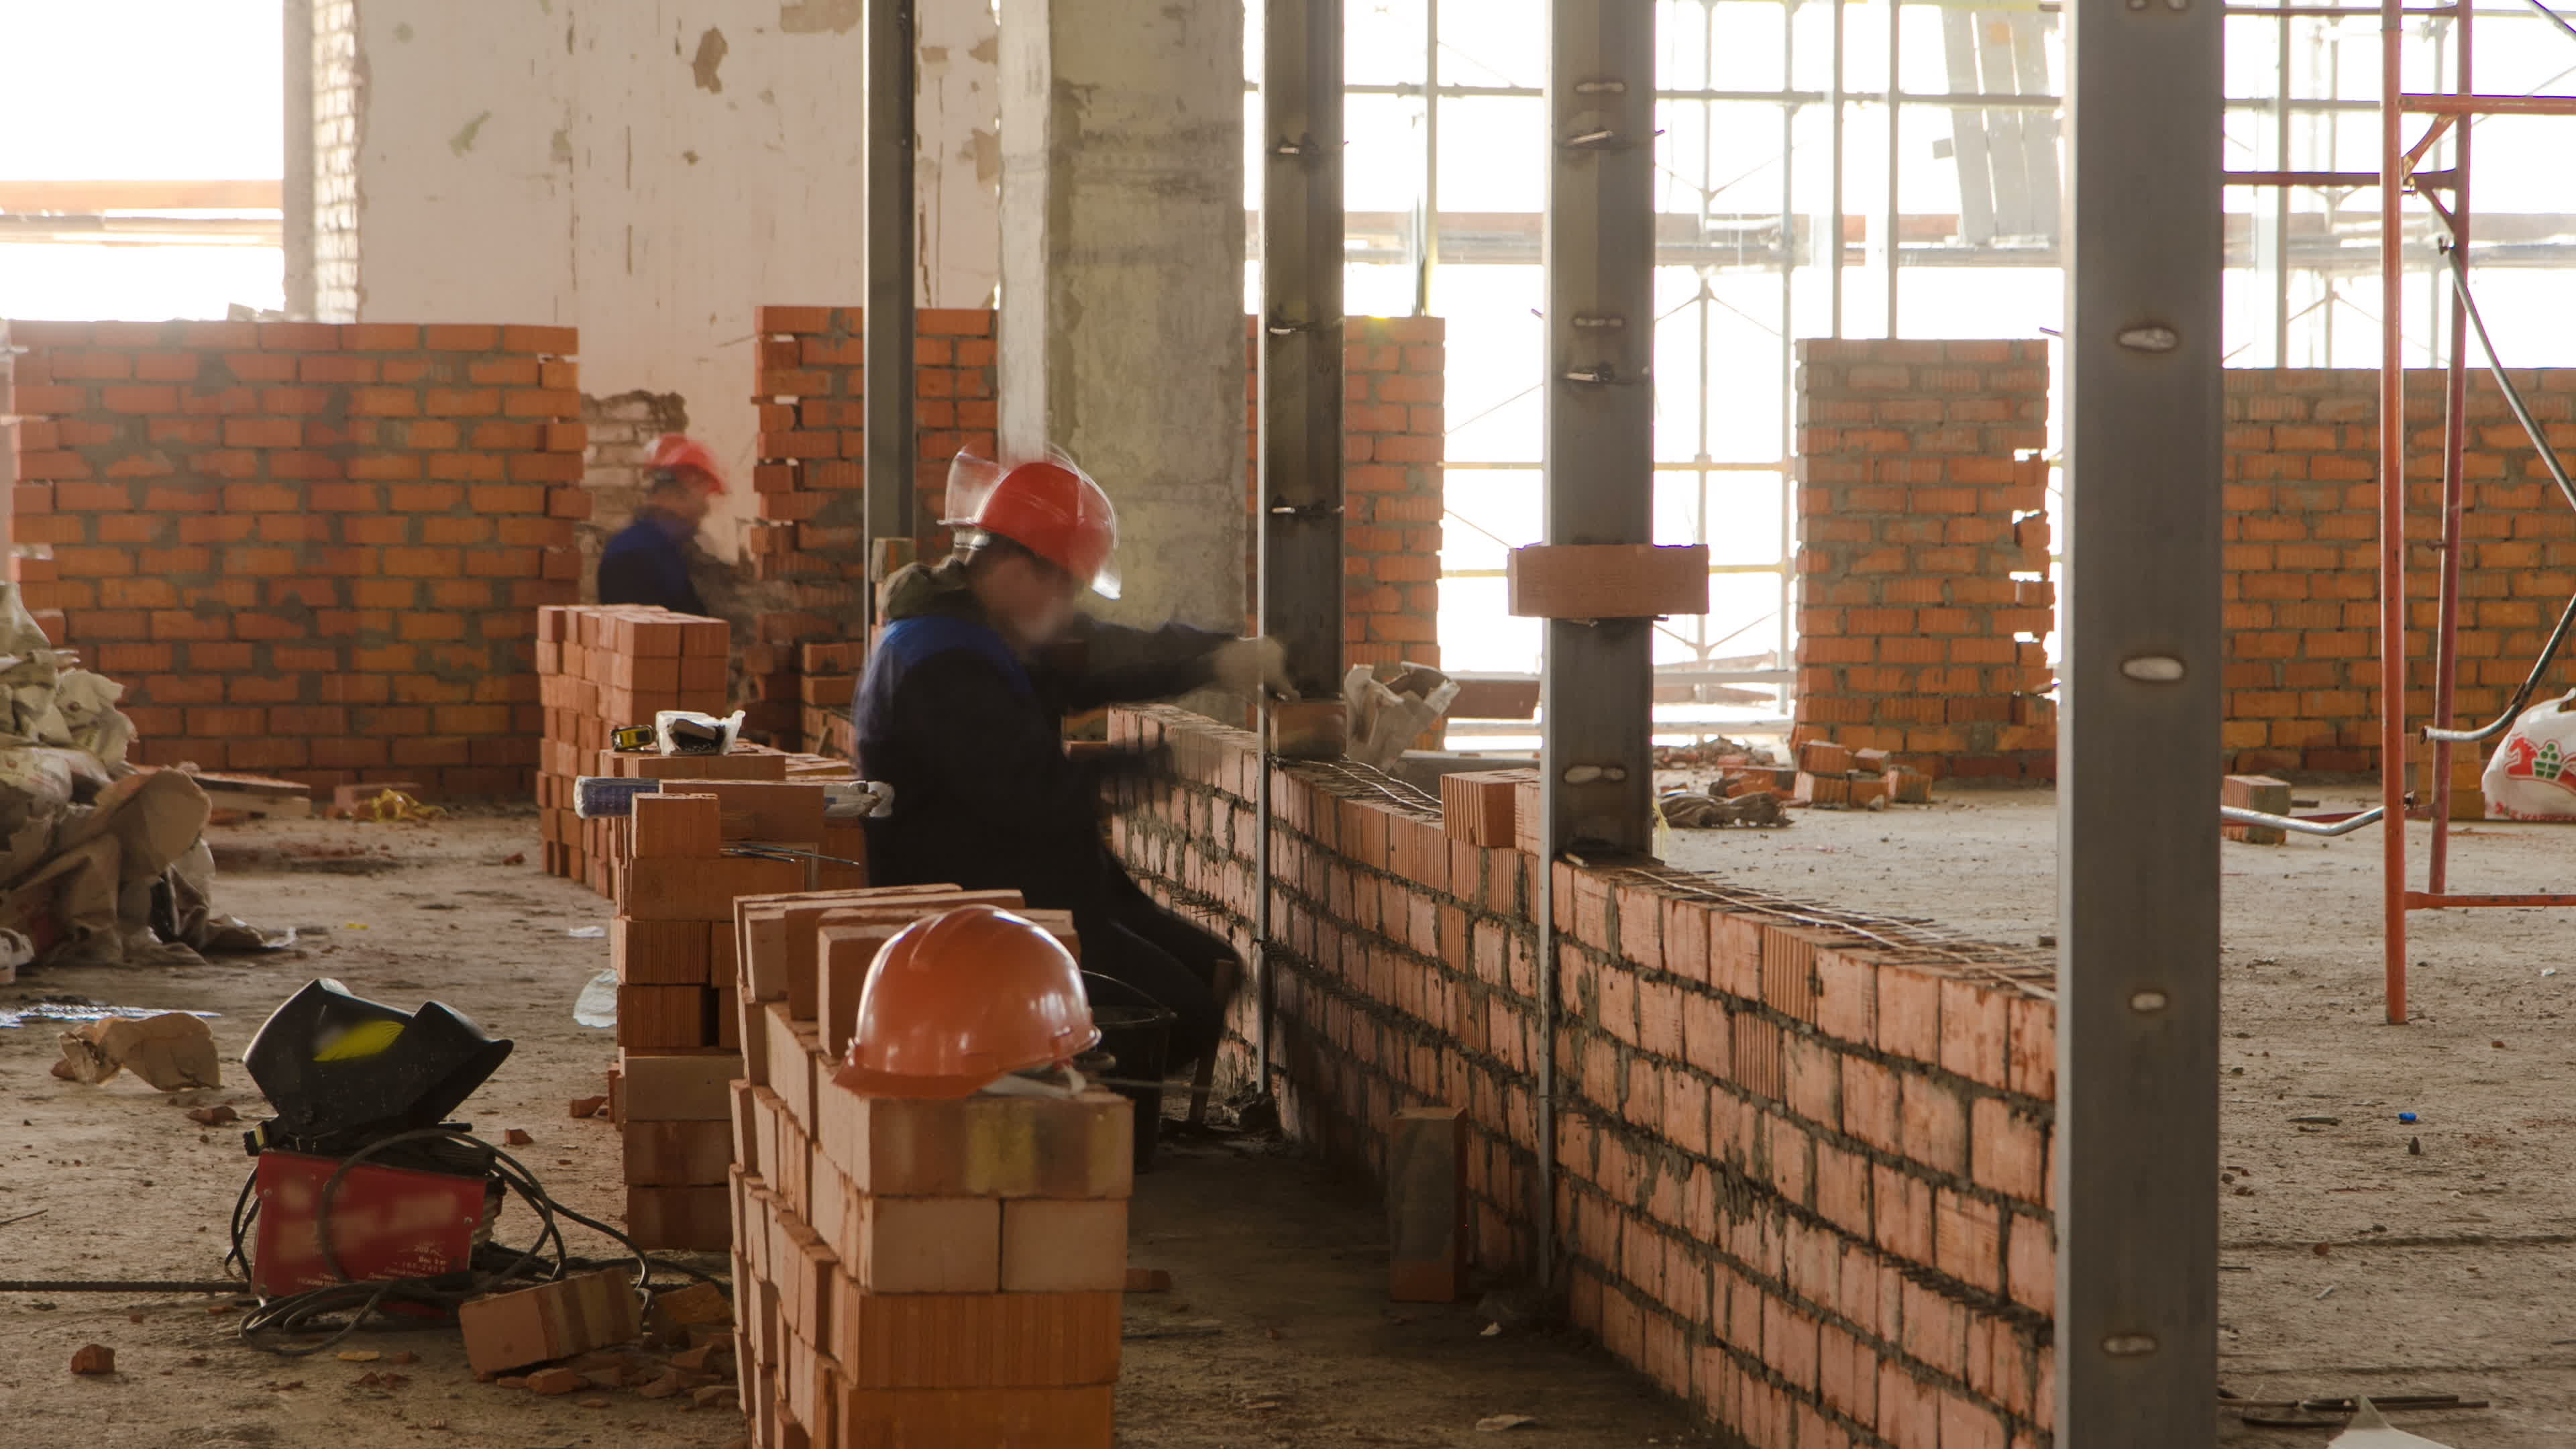 bricklaying prices Cheaper Than Retail Price> Buy Clothing, Accessories ...